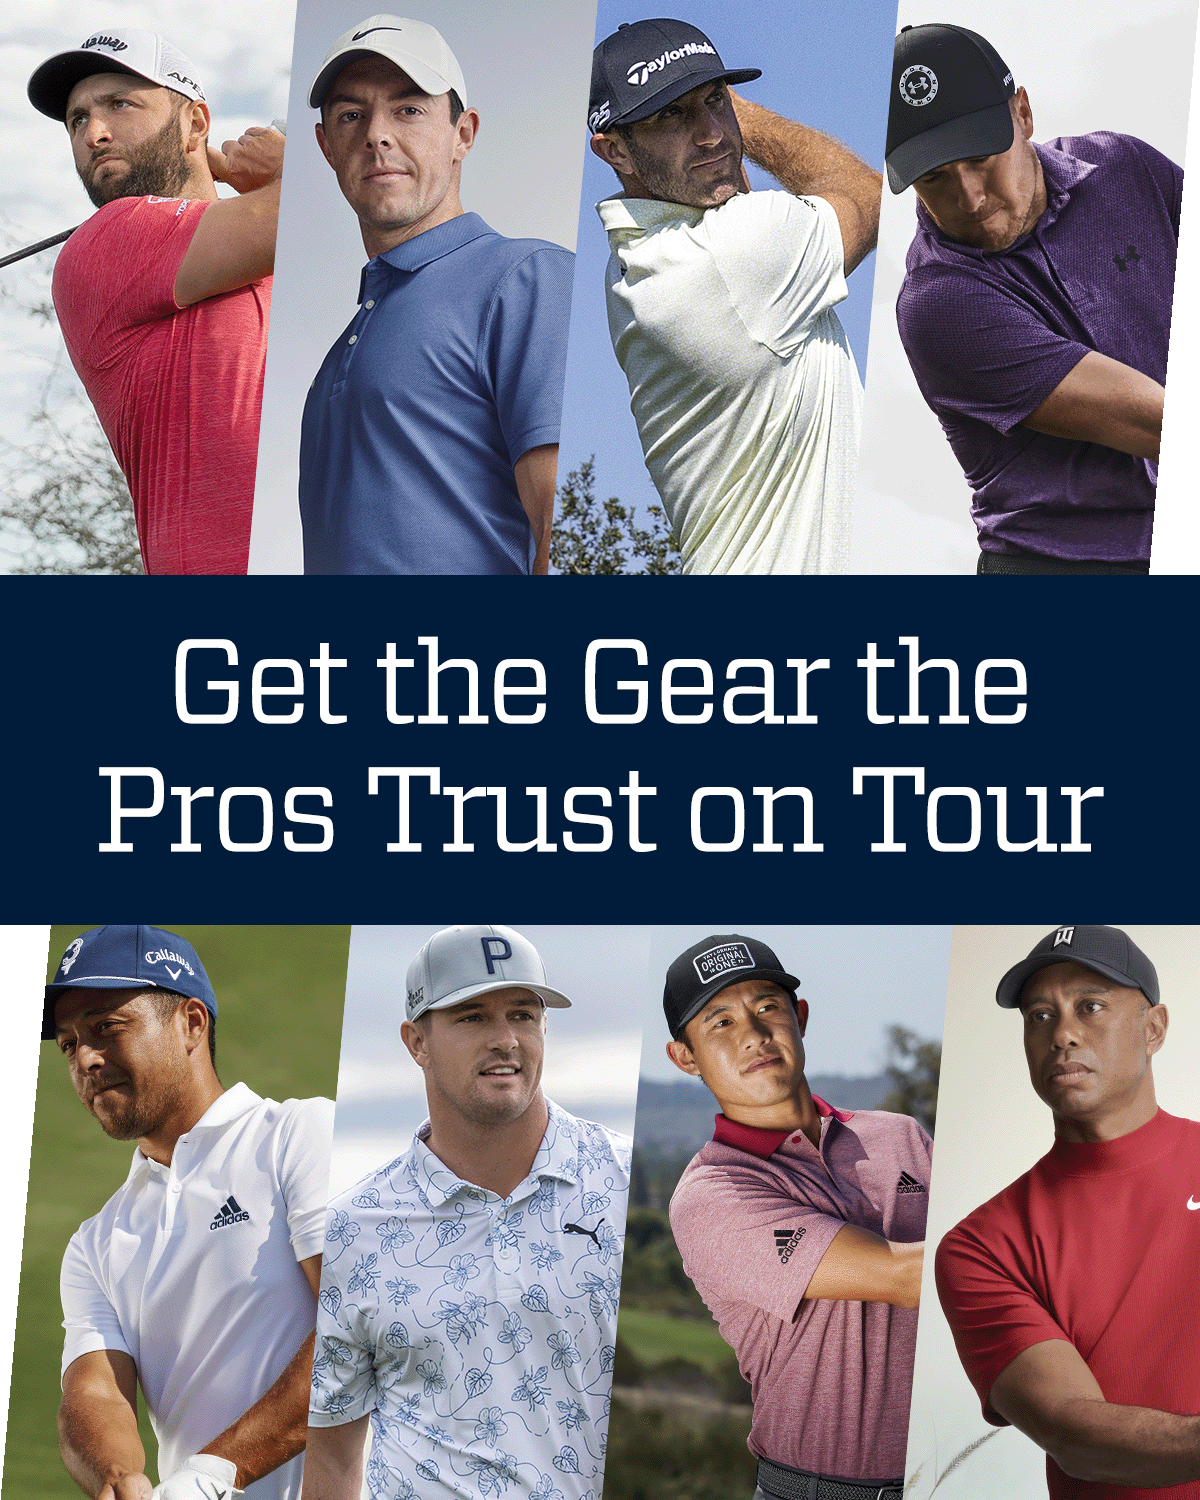 Get the gear the pros trust on tour.